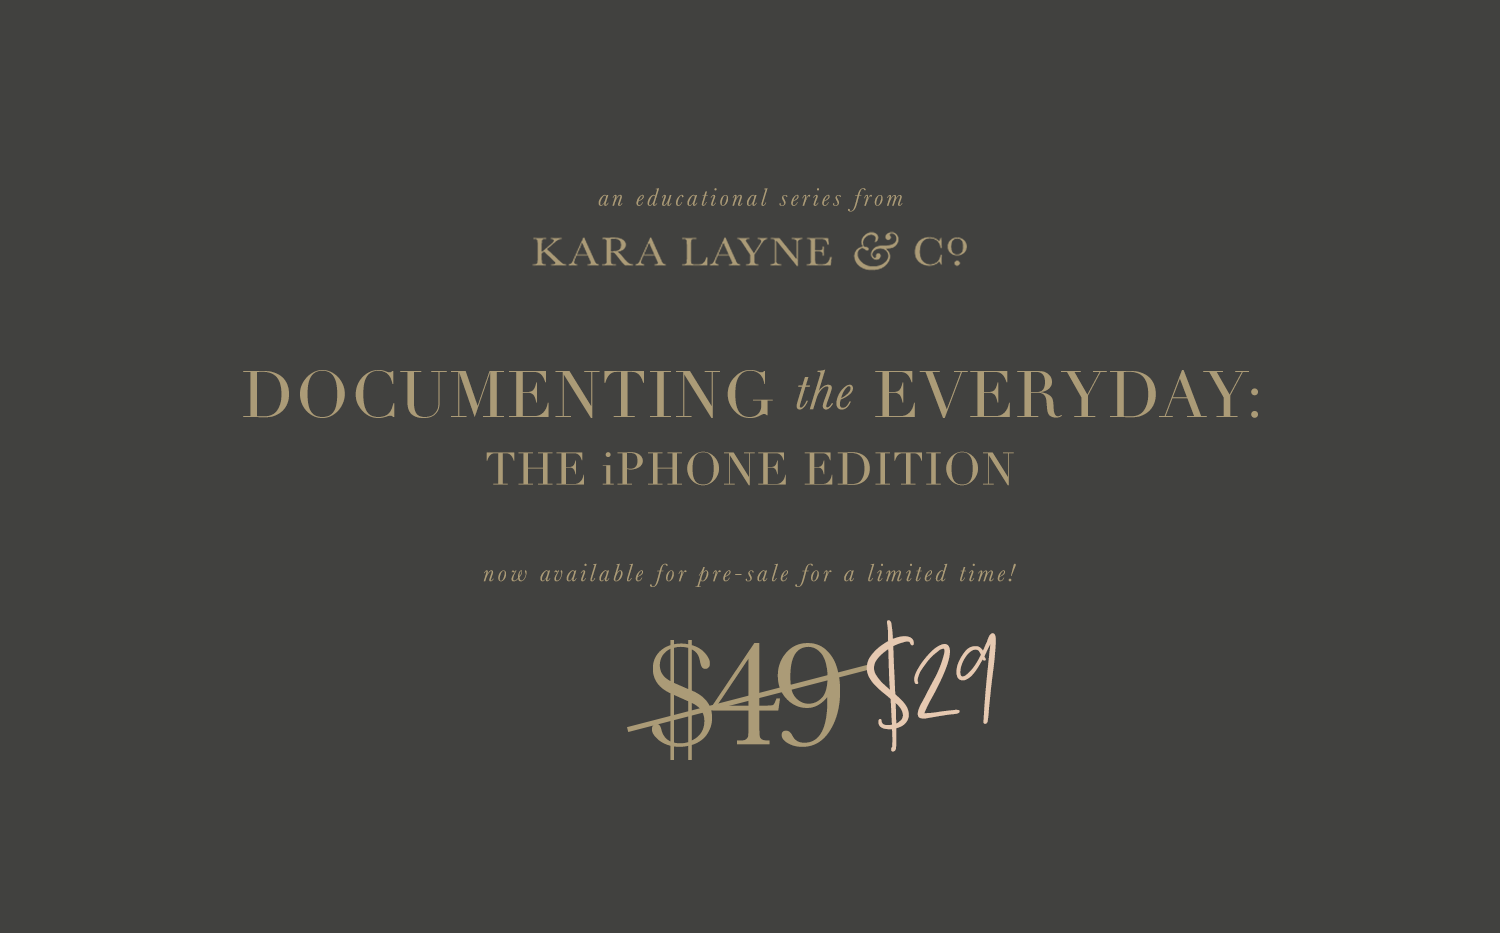 Learn How to Take Beautiful Photographs with Your iPhone in the all-new online course from Kara Layne & Co... Documenting the Everyday: iPhone Edition #iPhonePhotography #Photography